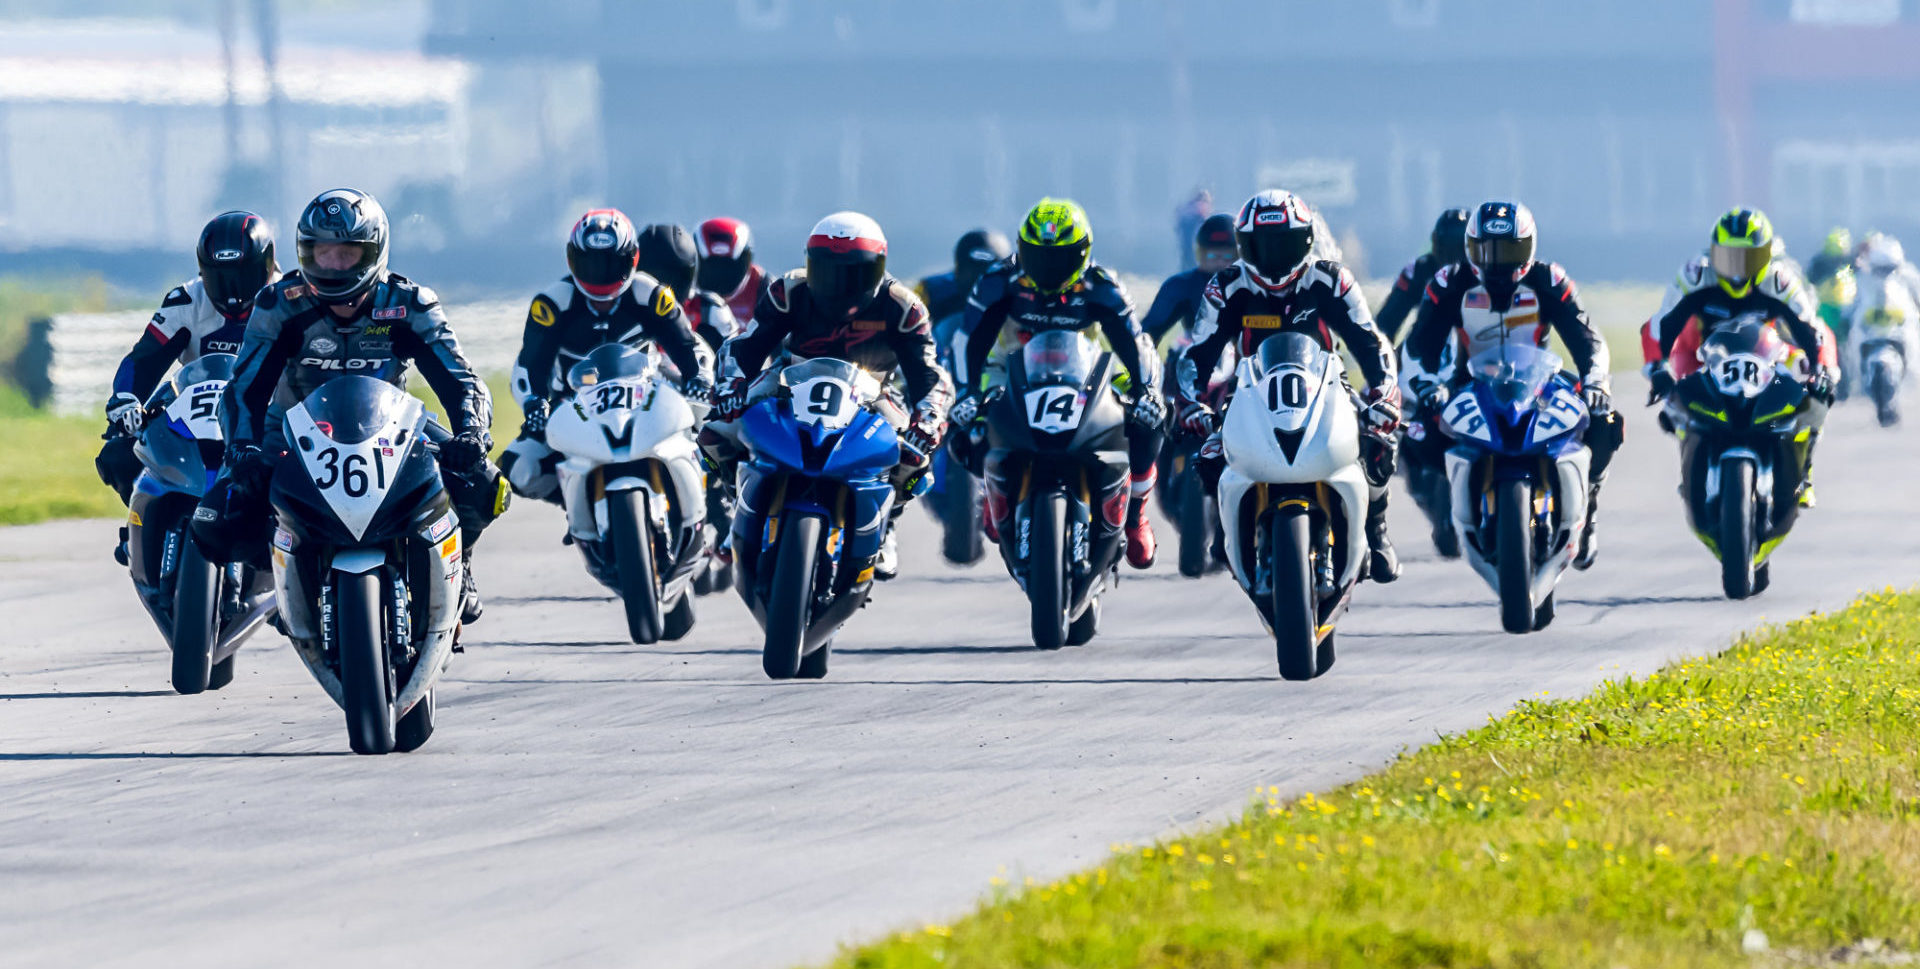 The start of a CMRA race at NOLA Motorsports Park in 2019. Photo by David Gillen/dgillenphoto.com, courtesy of AMA.